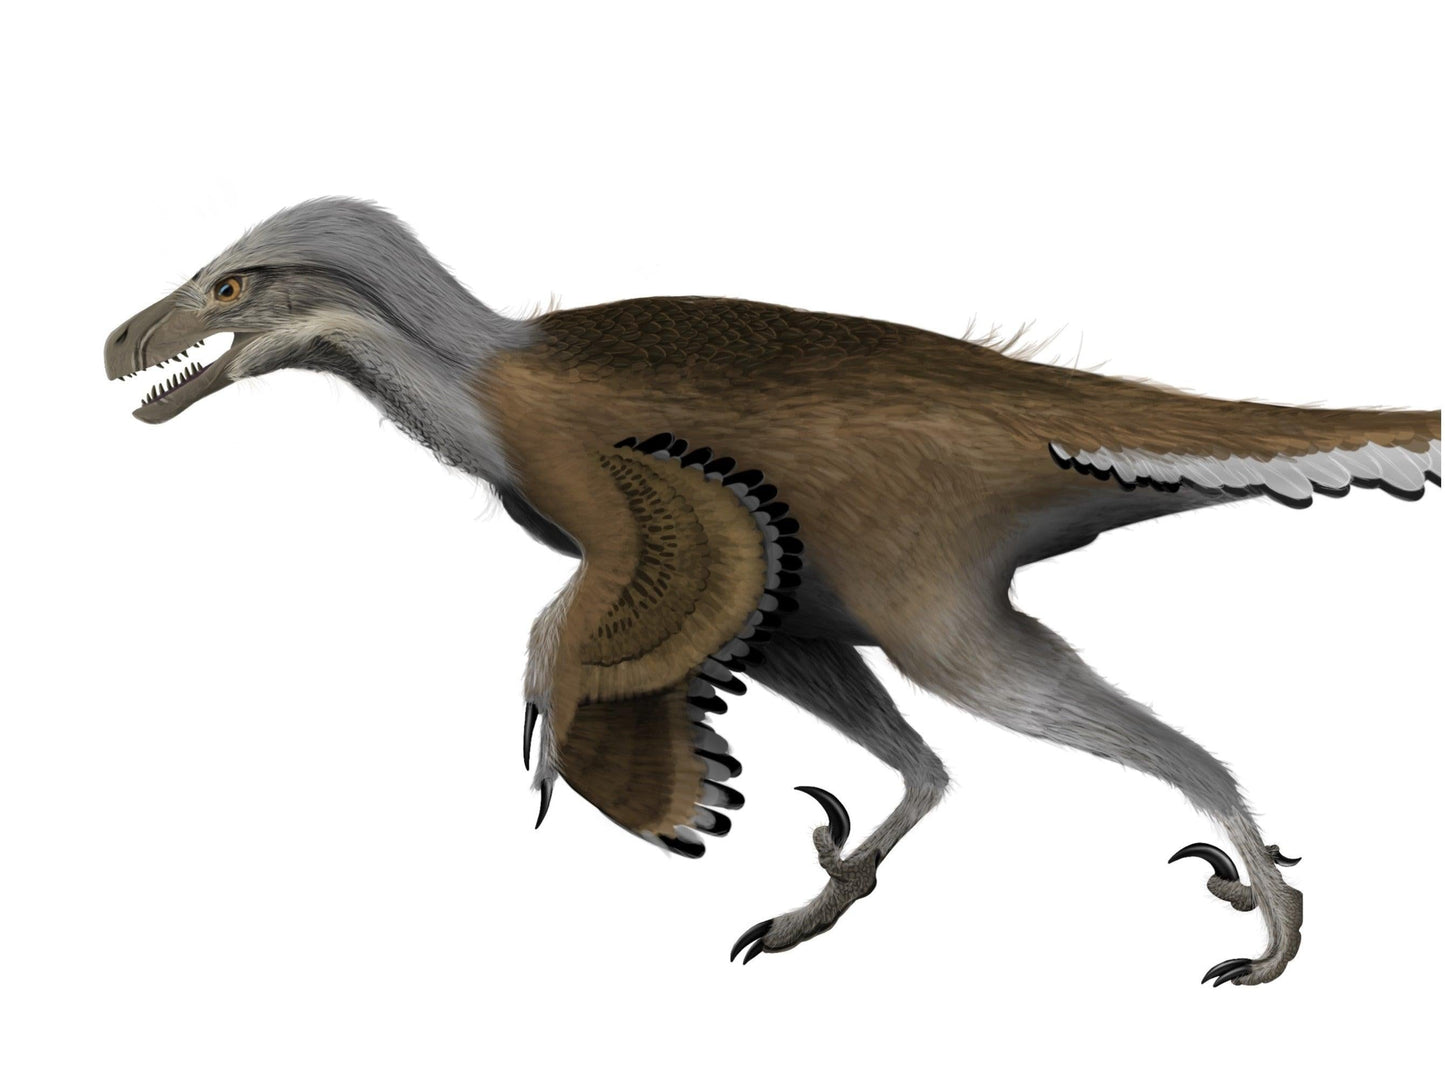 Dromaeosaurus exclusive paleoart that comes with the Dromaeosaurus claw cast